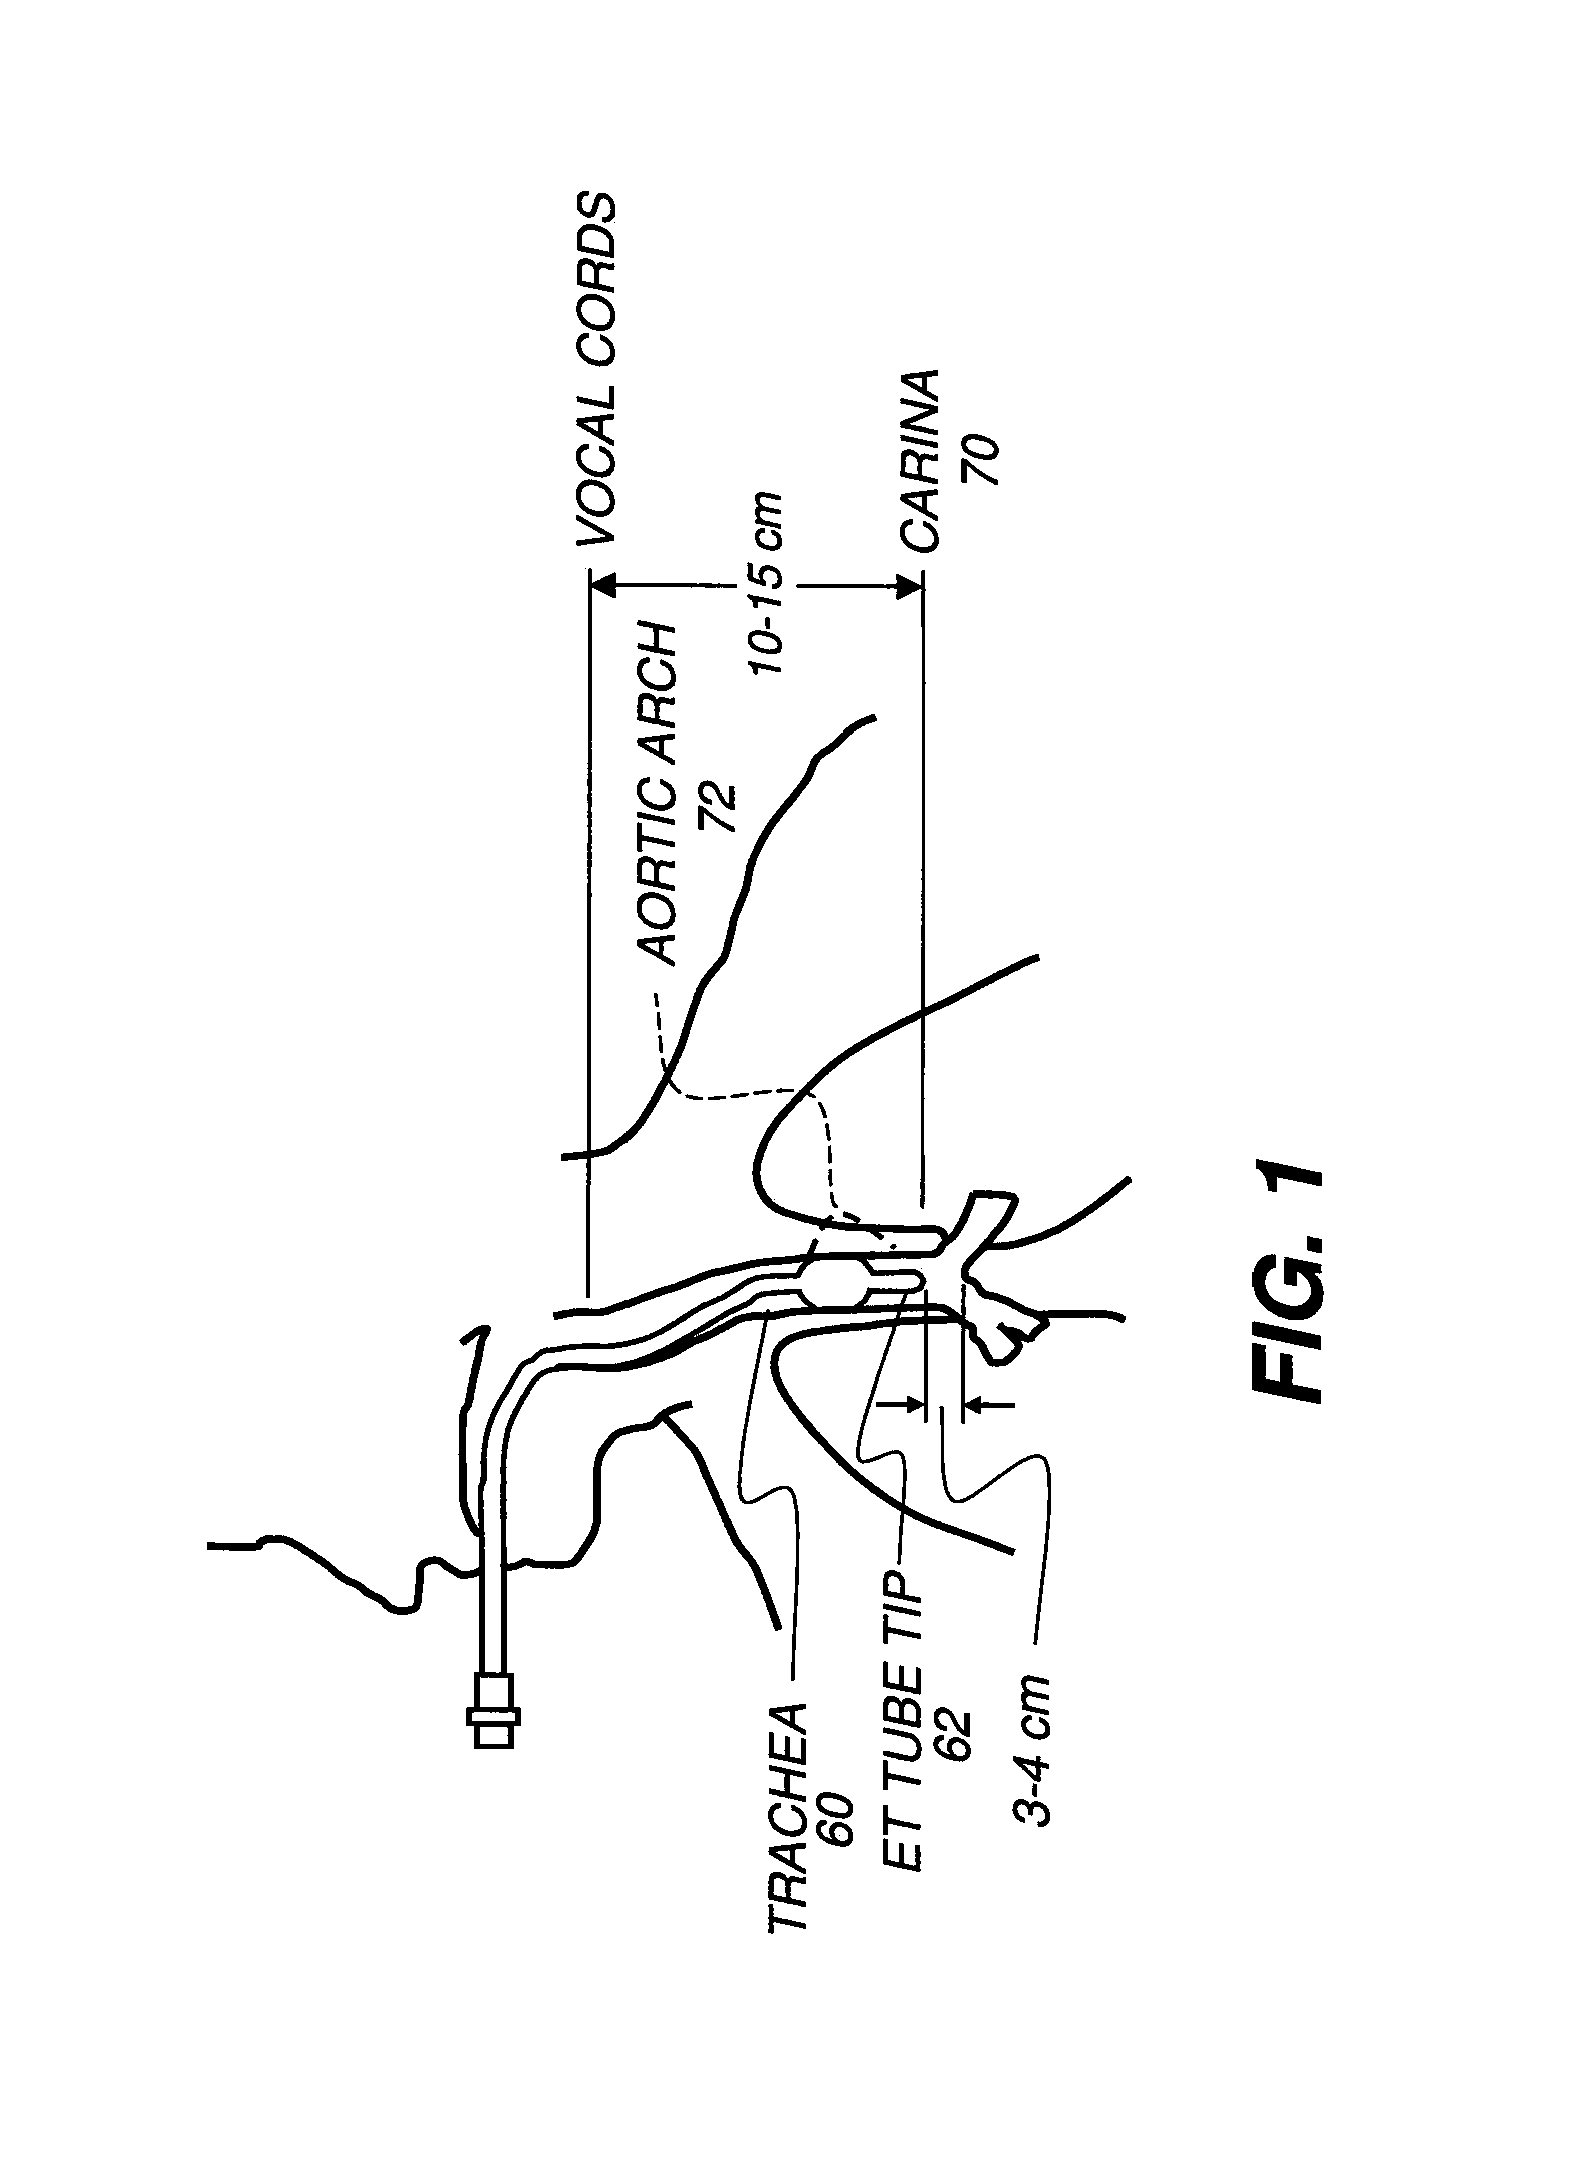 Method for detecting anatomical structures